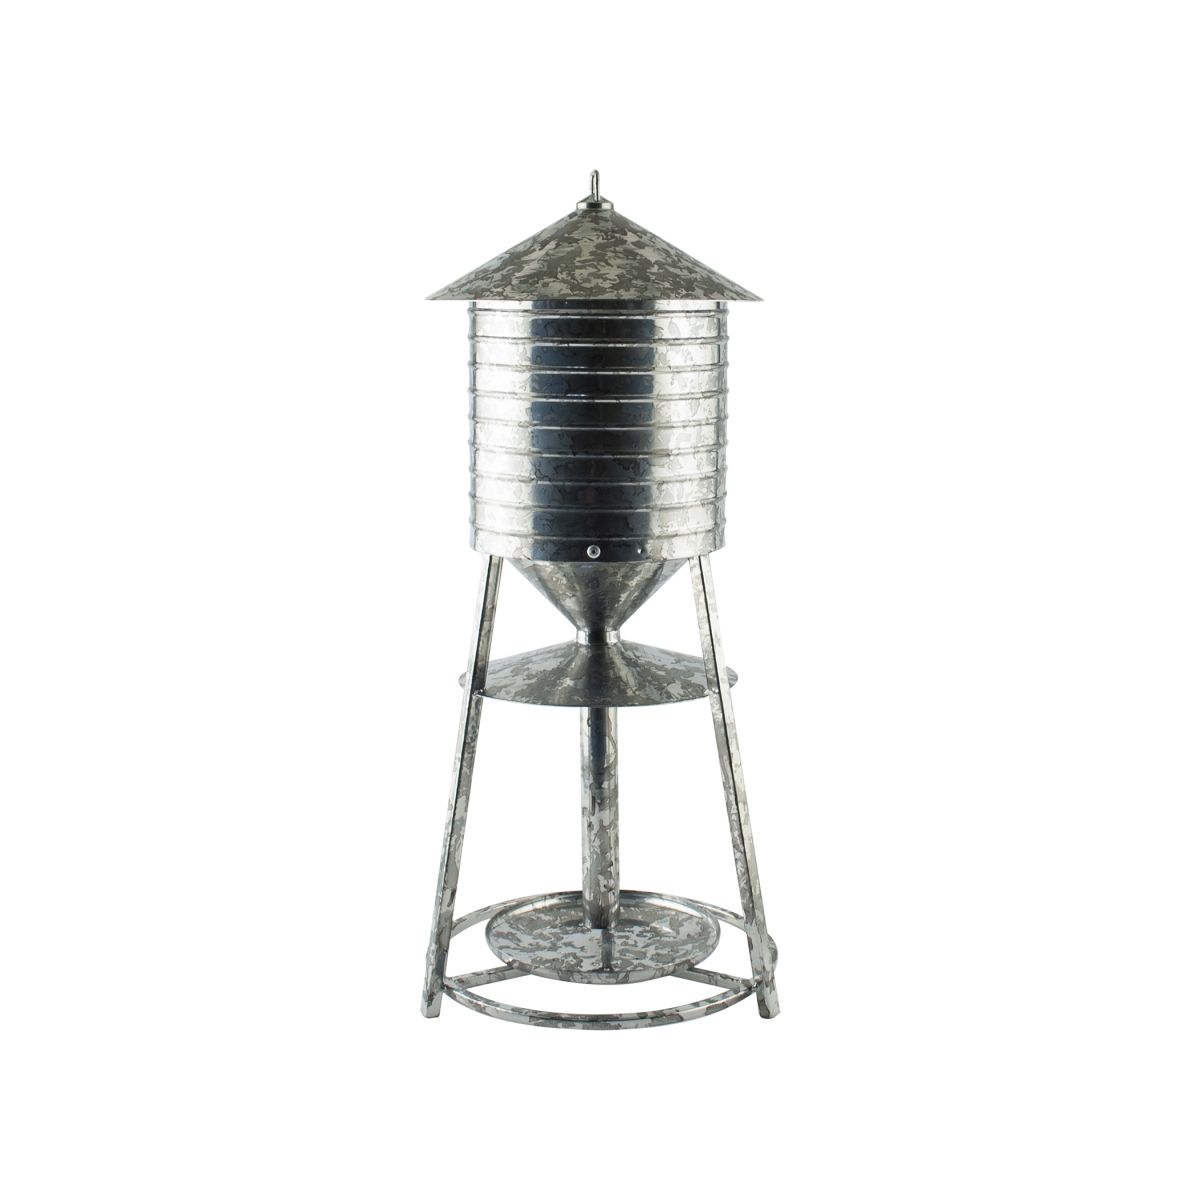 Picture of Panacea Rustic Farmhouse 026697 2.5 lbs Galvanized Water Tower Seed Tray Feeder